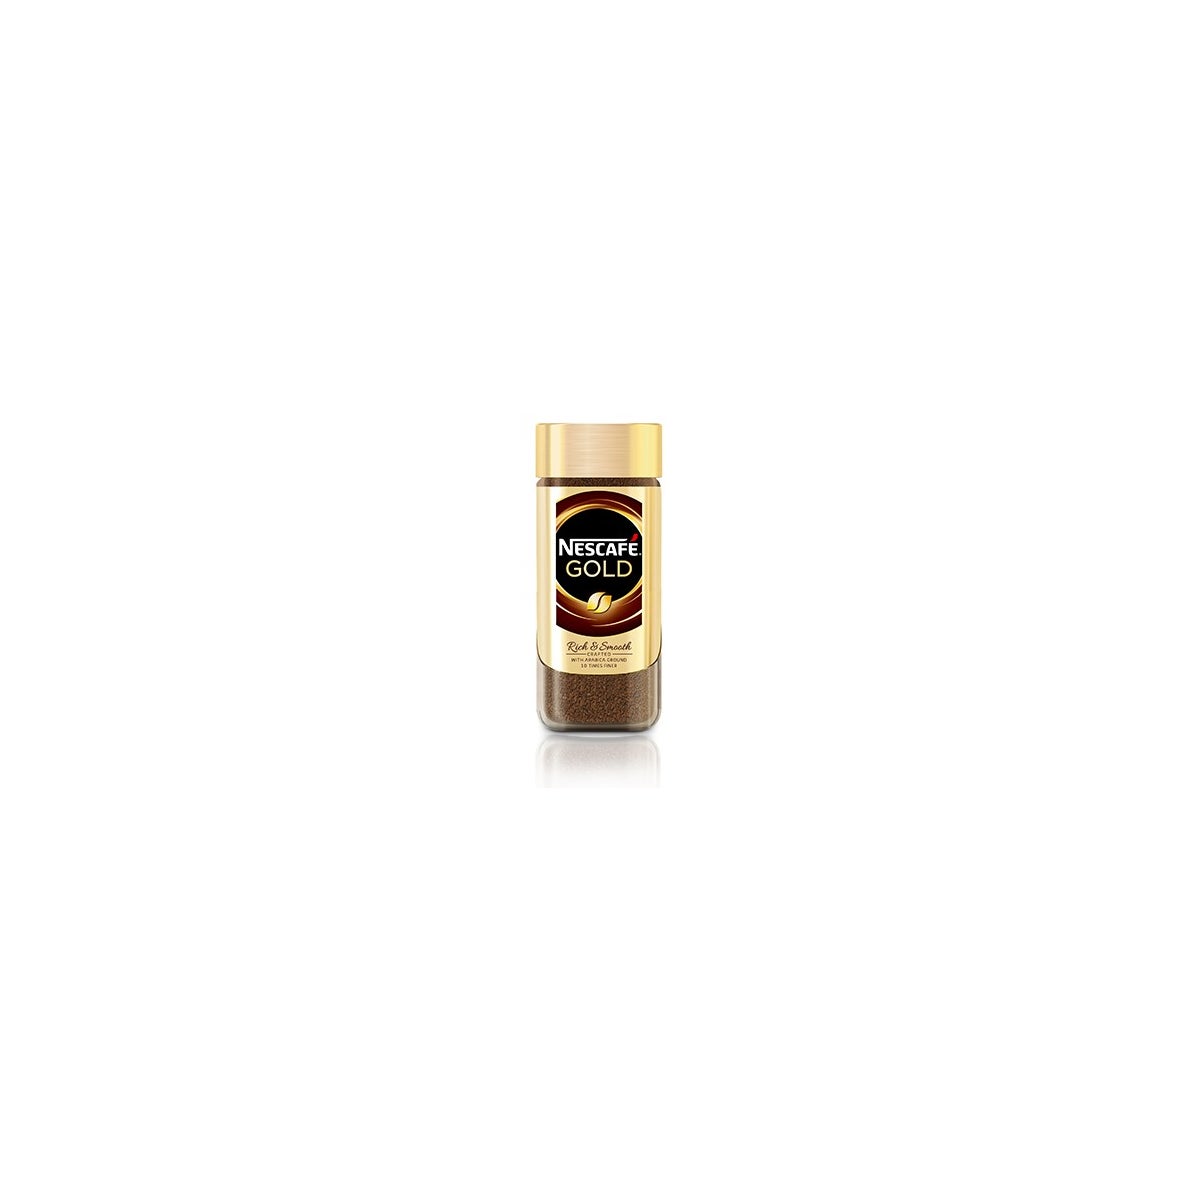 Nescafe GOLD Instant Coffee 100g * 12